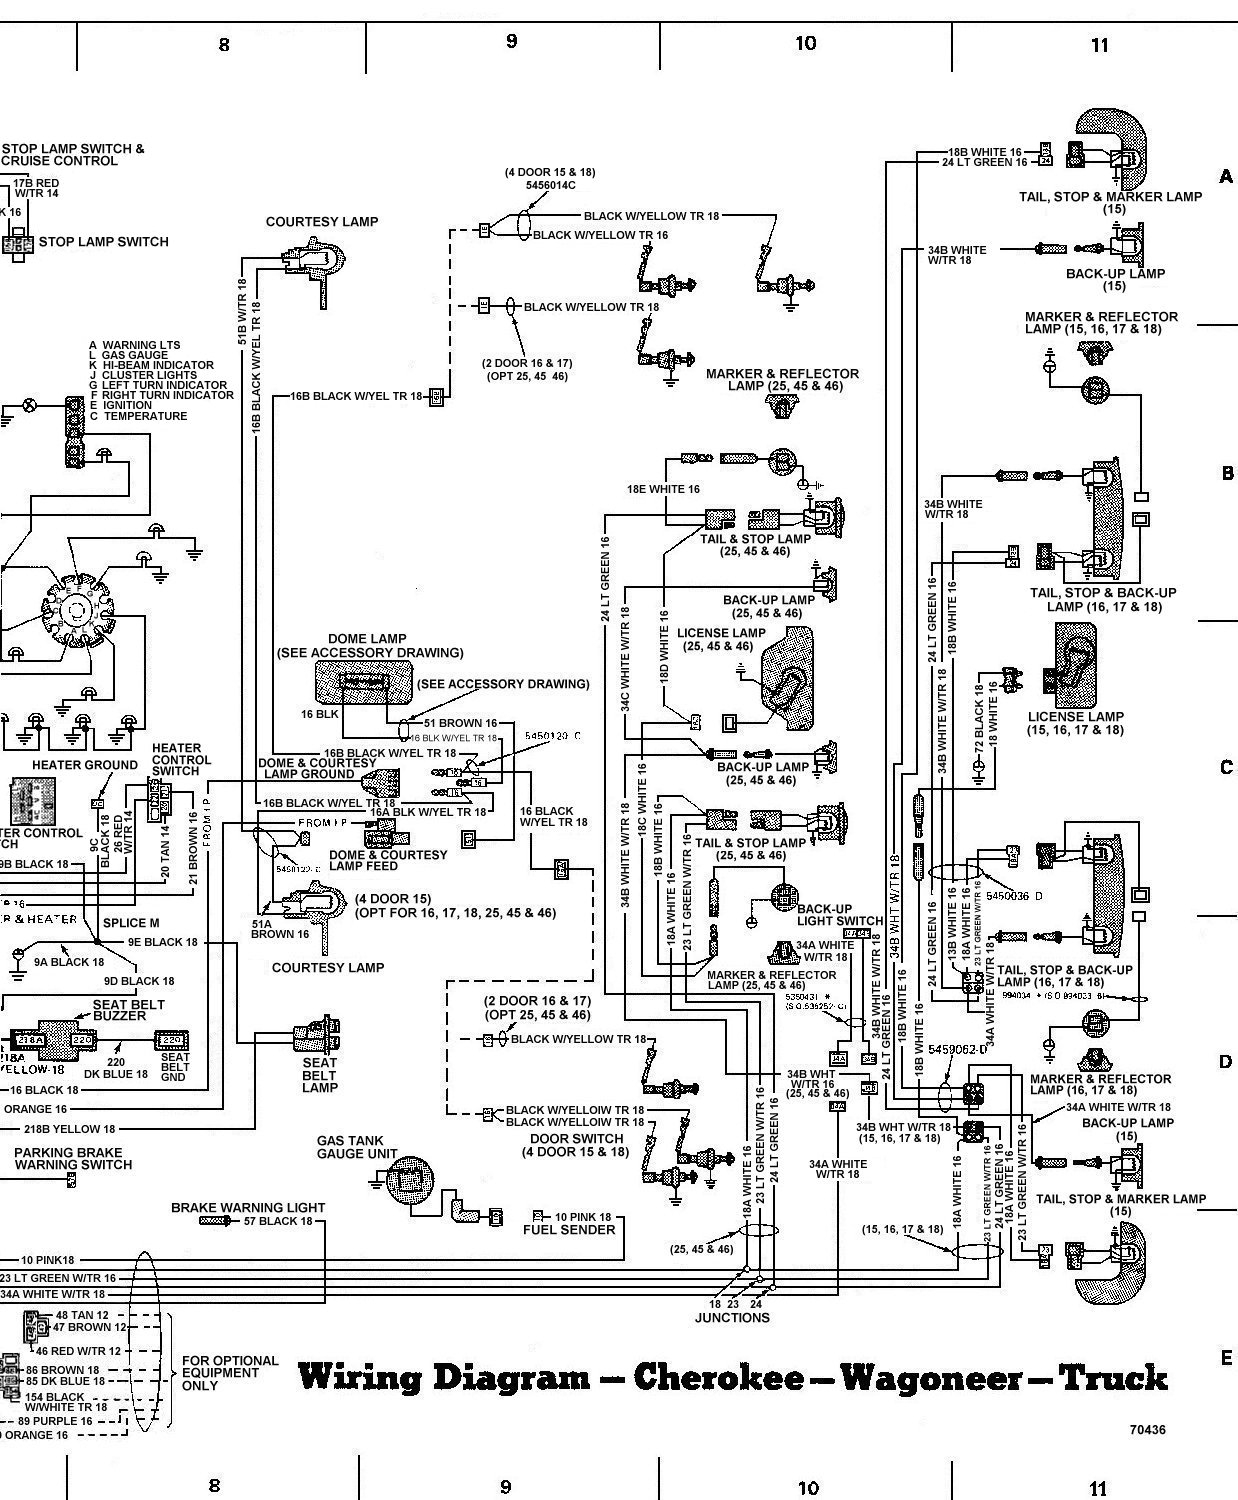 Jeep 4.0 Wiring Harness - Data Wiring Diagram Today - 2000 Jeep Grand Cherokee Wiring Diagram